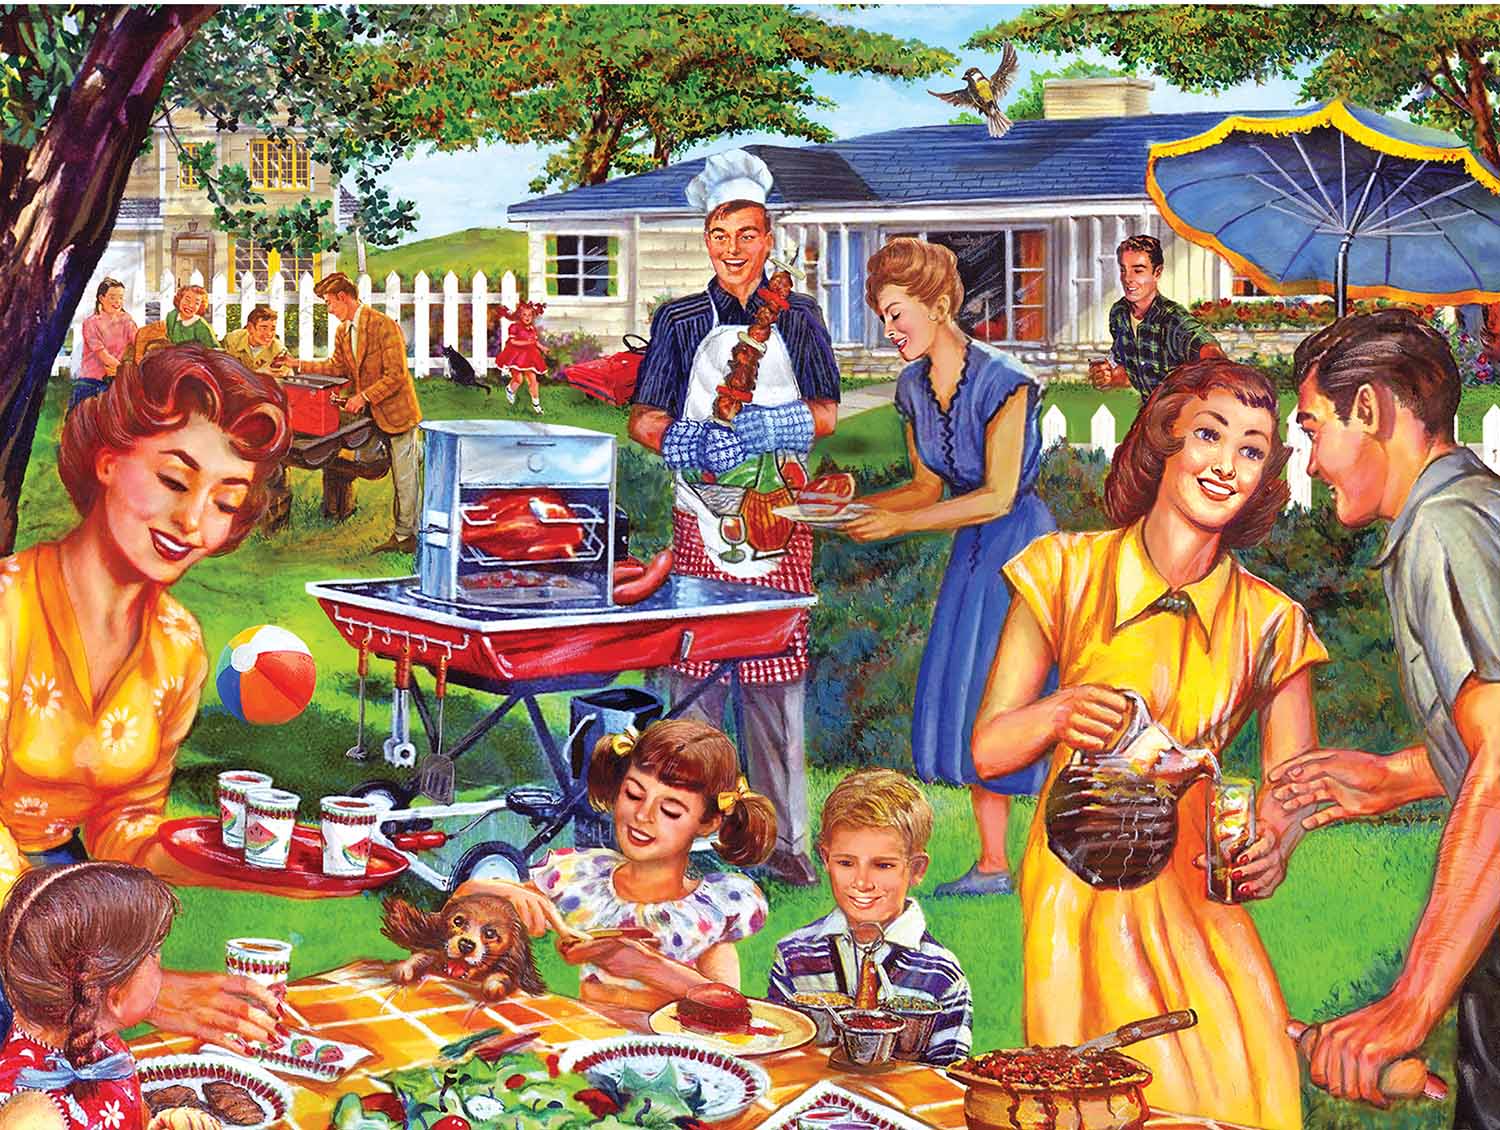 Back To The Past -  Backyard Barbeque Food and Drink Jigsaw Puzzle